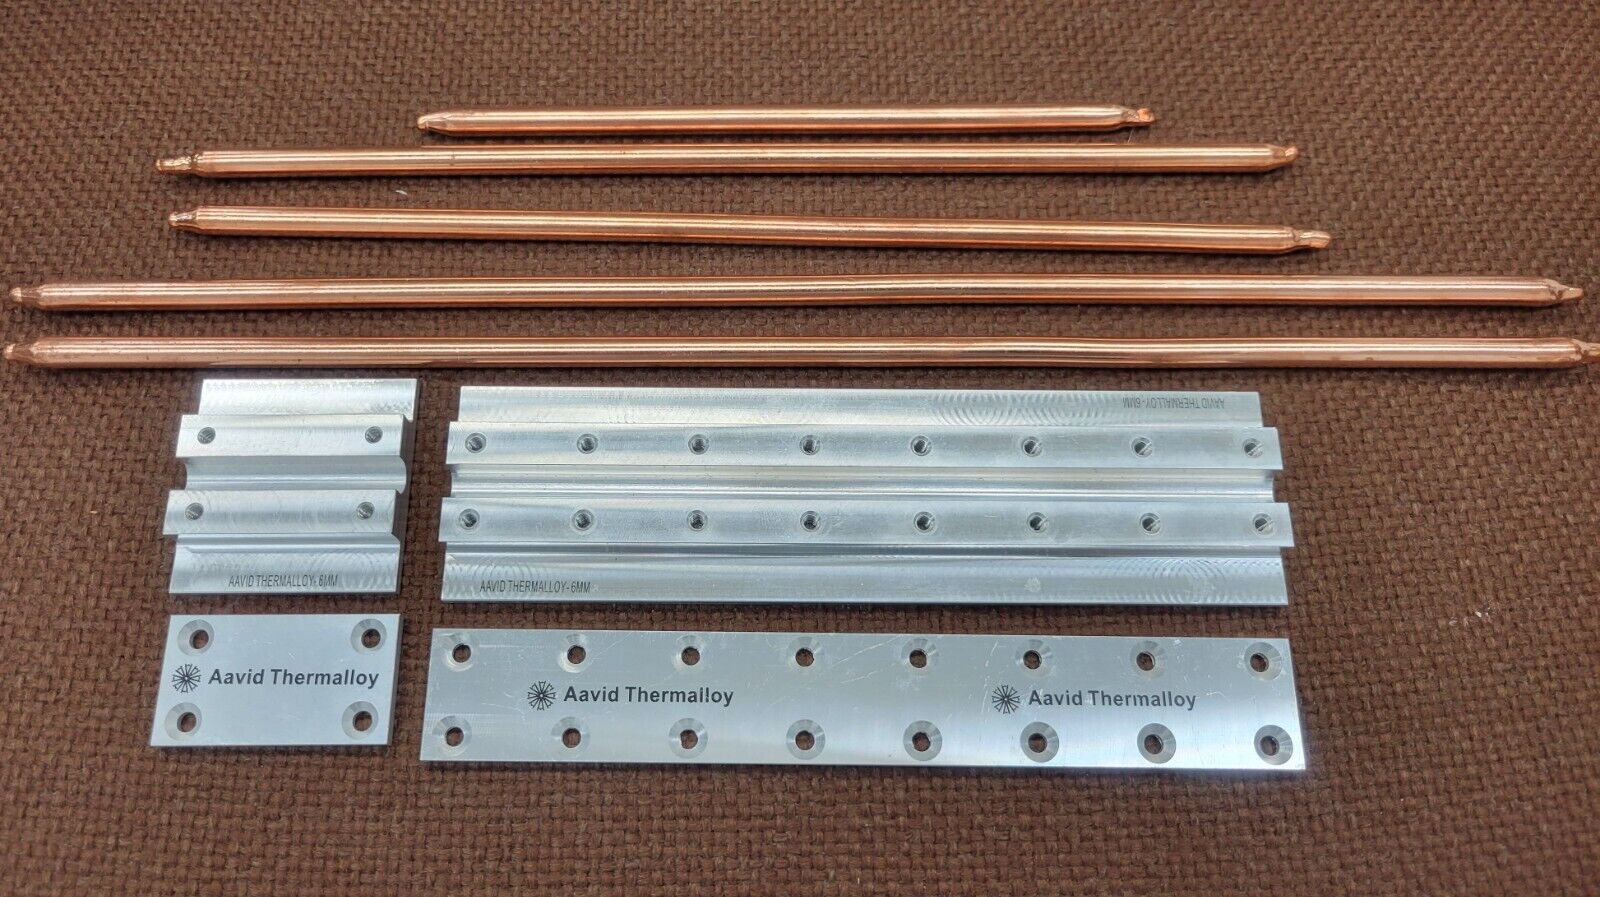 Aavid Heat Pipe Heat Exchanger Discovery Evaluation Kit 6mm Diameter Heat Pipes